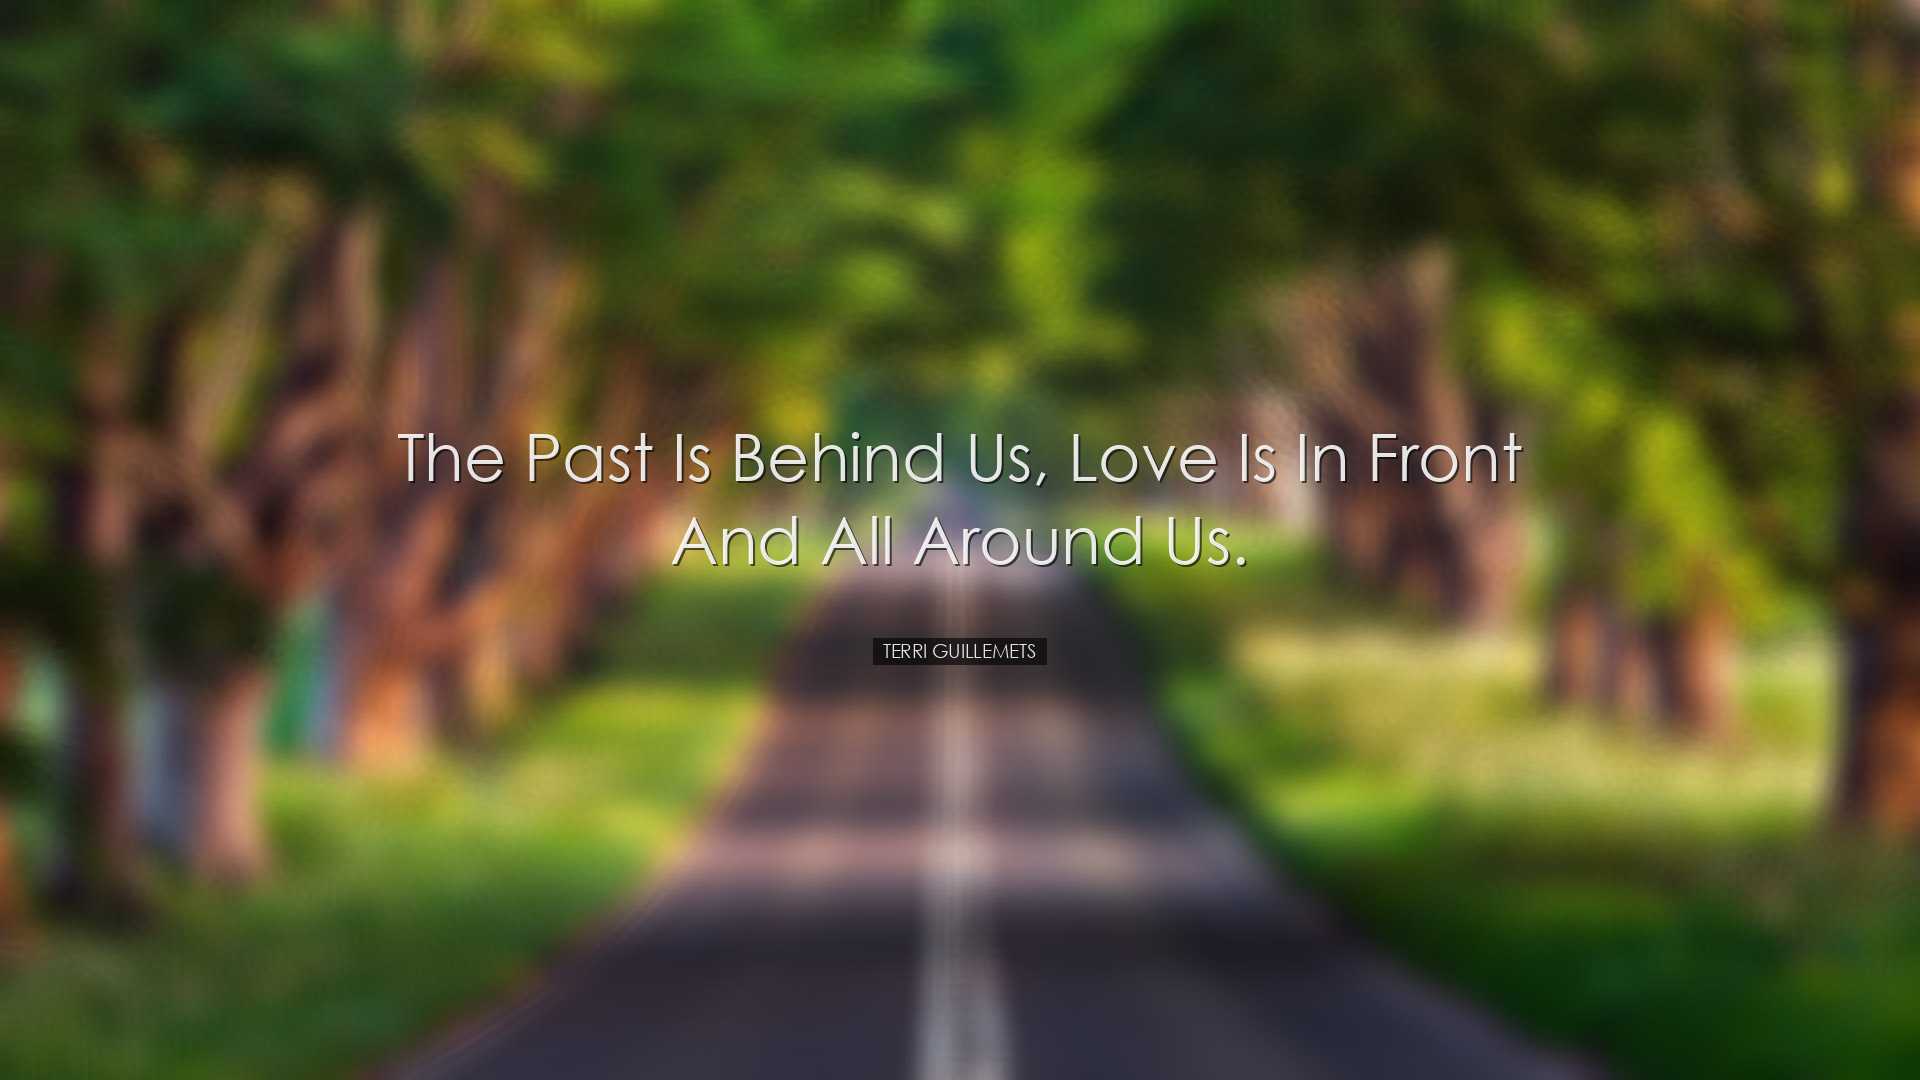 The past is behind us, love is in front and all around us. - Terri